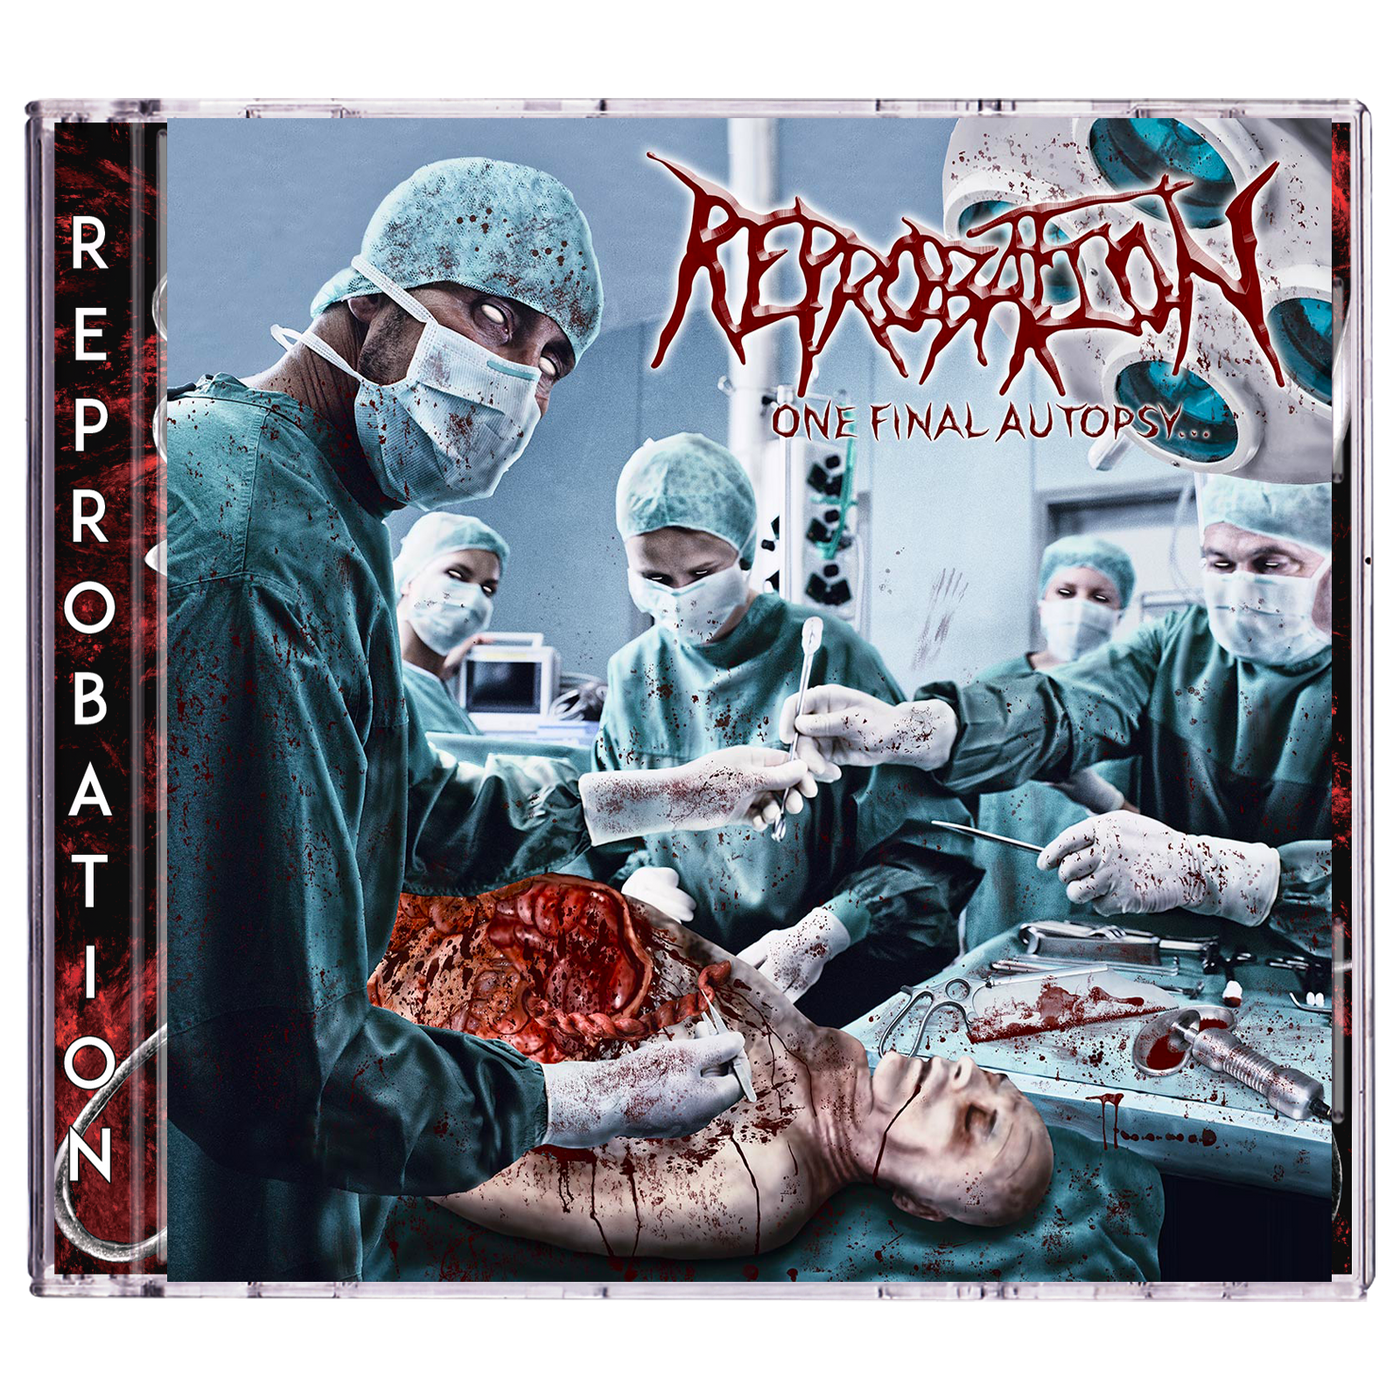 Reprobation 'One Final Autopsy' CD